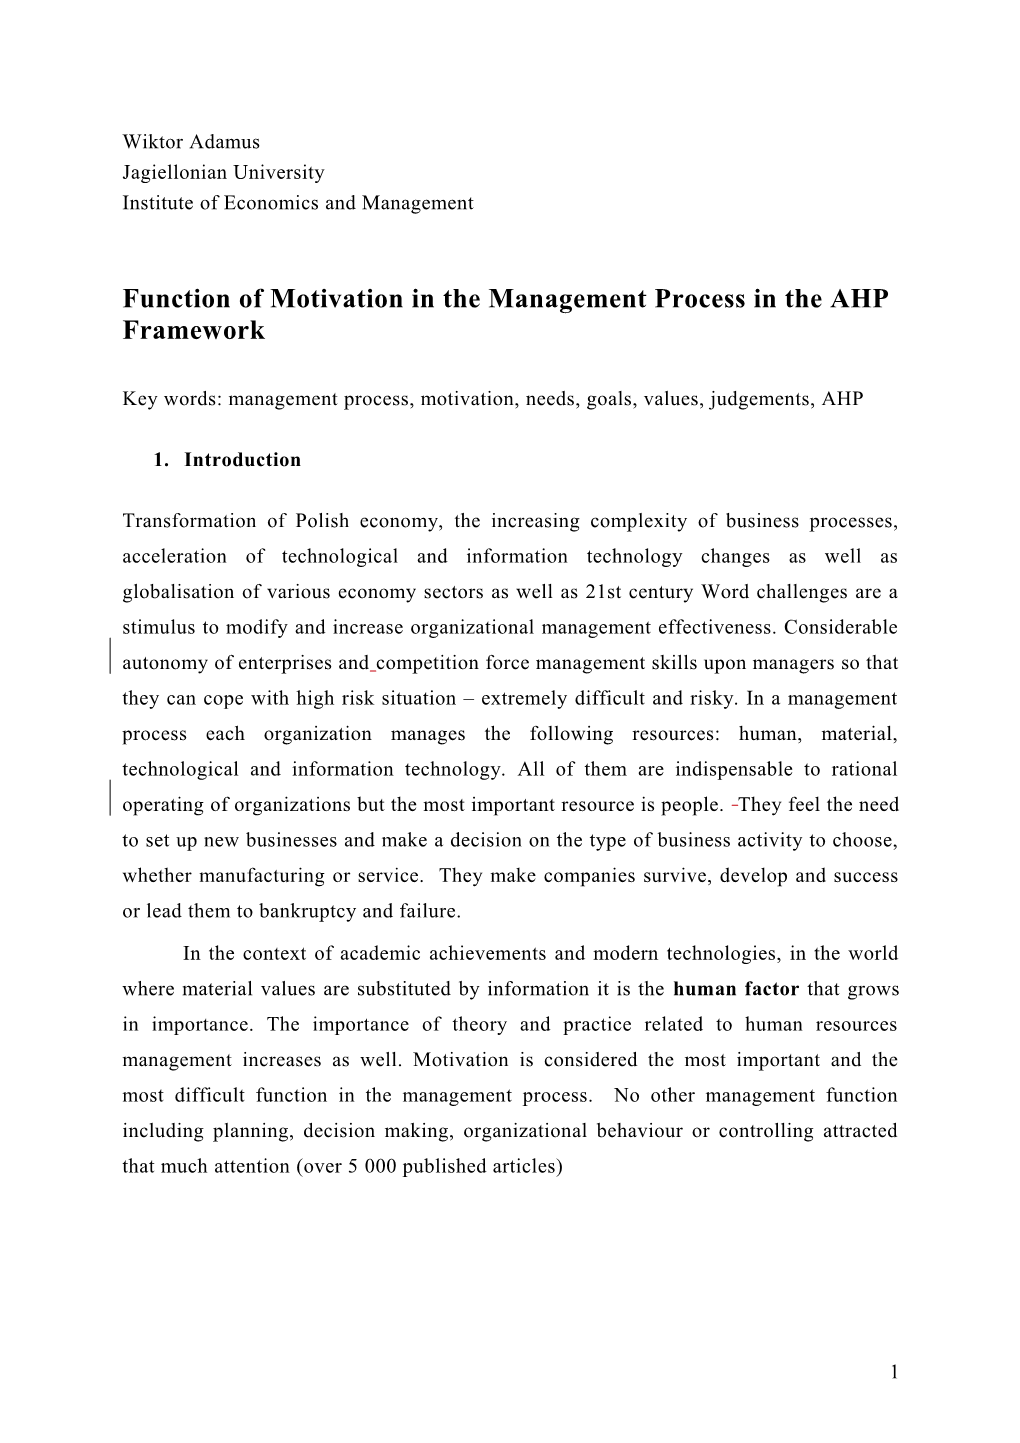 Function of Motivation in the Management Process in the AHP Framework